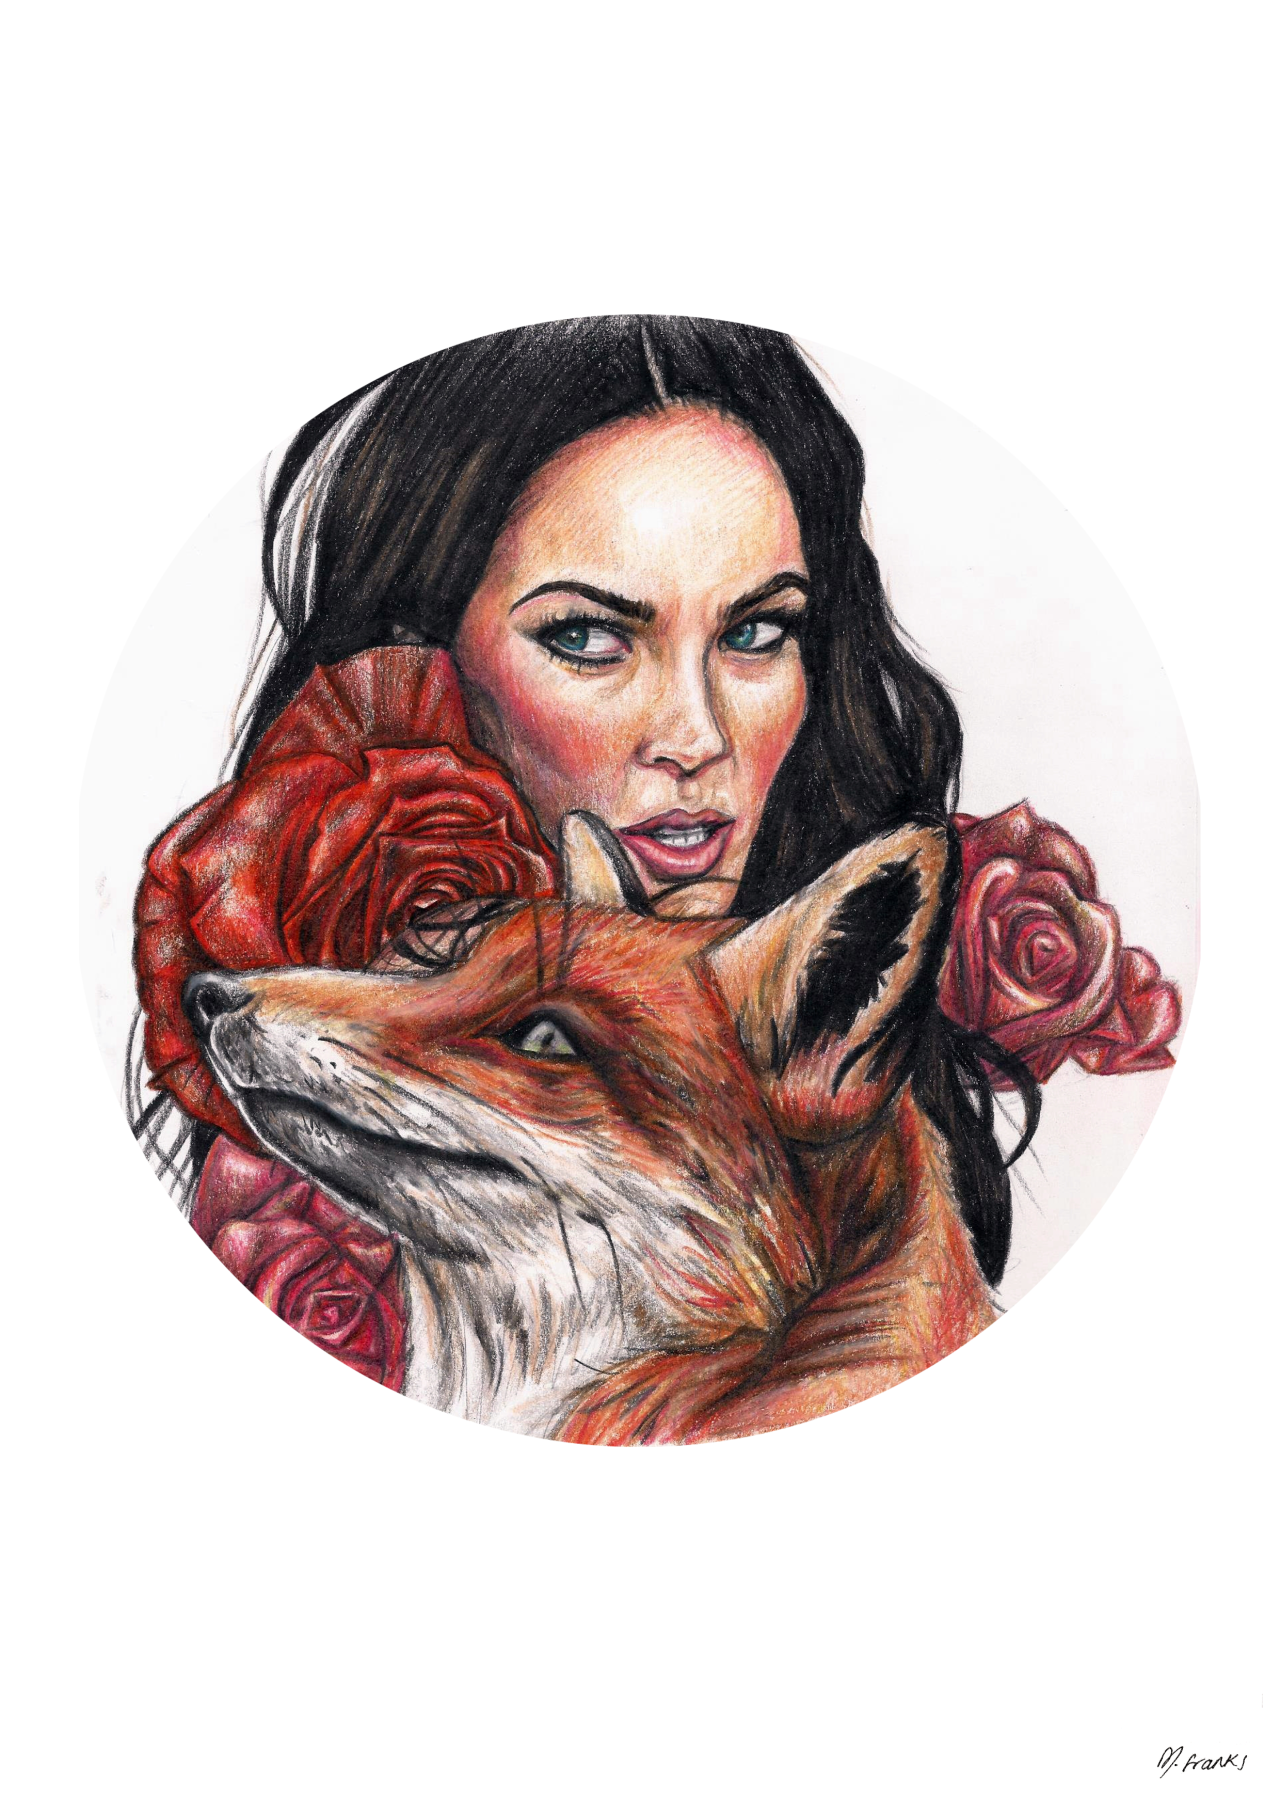 “I would like to uncover the secrets of the universe.” - Megan Fox (by Melody Franks)